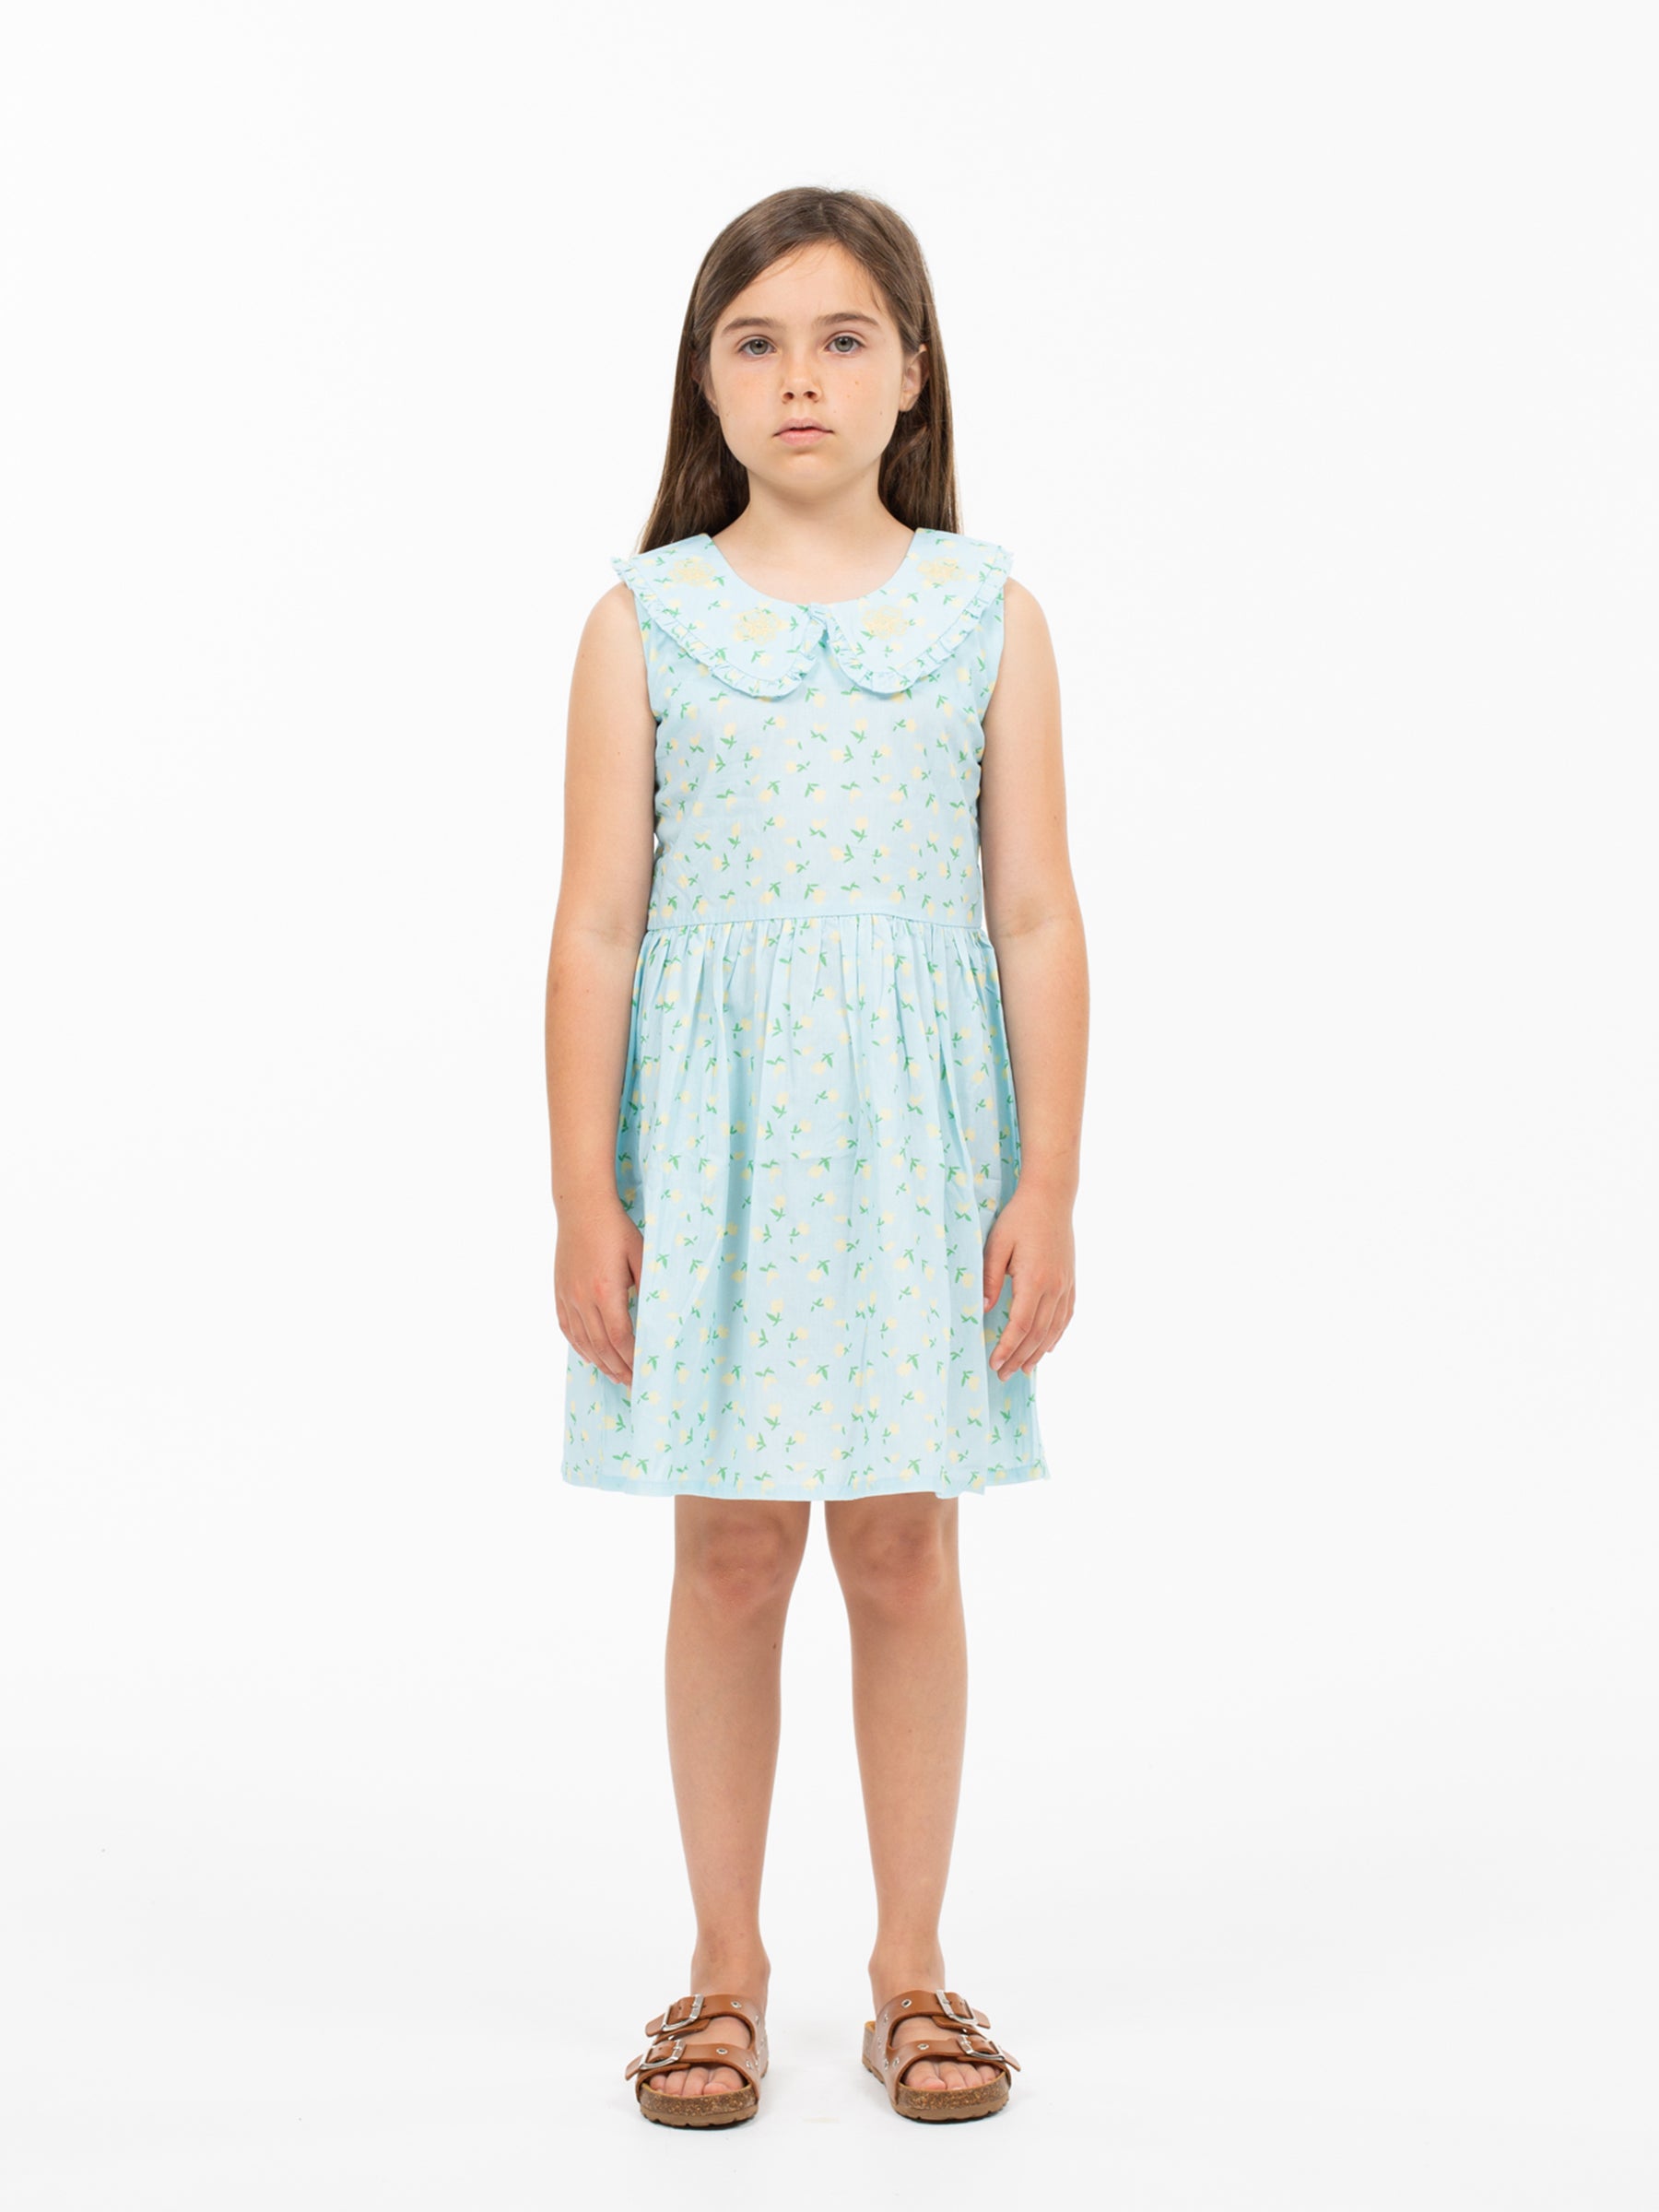 Wander and Wonder - phyllis dress - icing floral